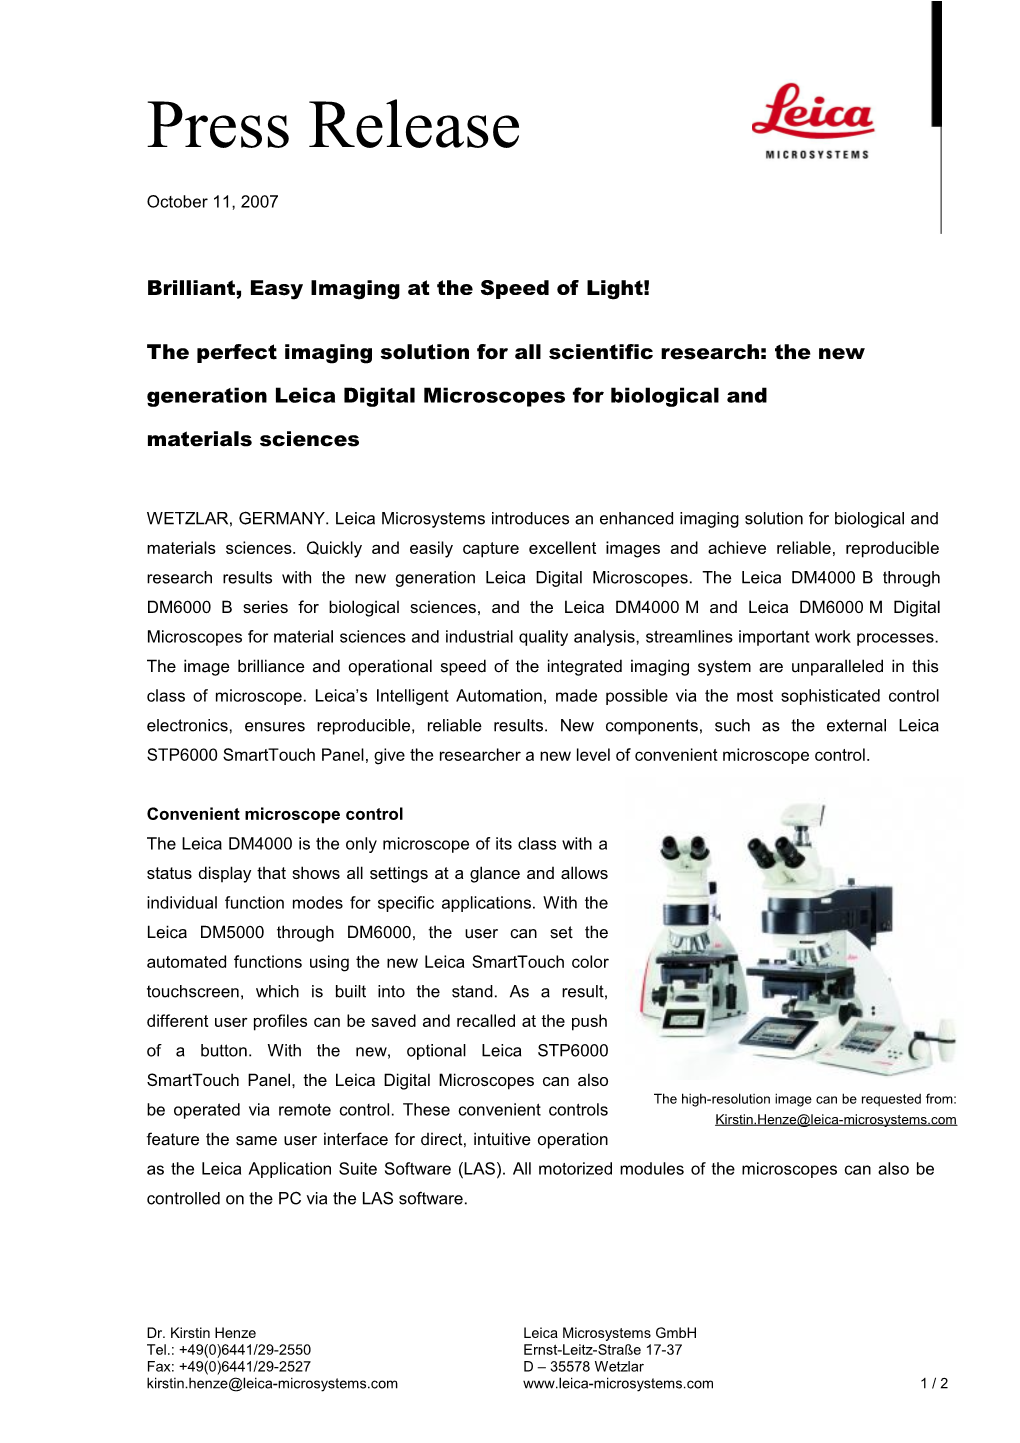 Brilliant, Easy Imaging at the Speed of Light!